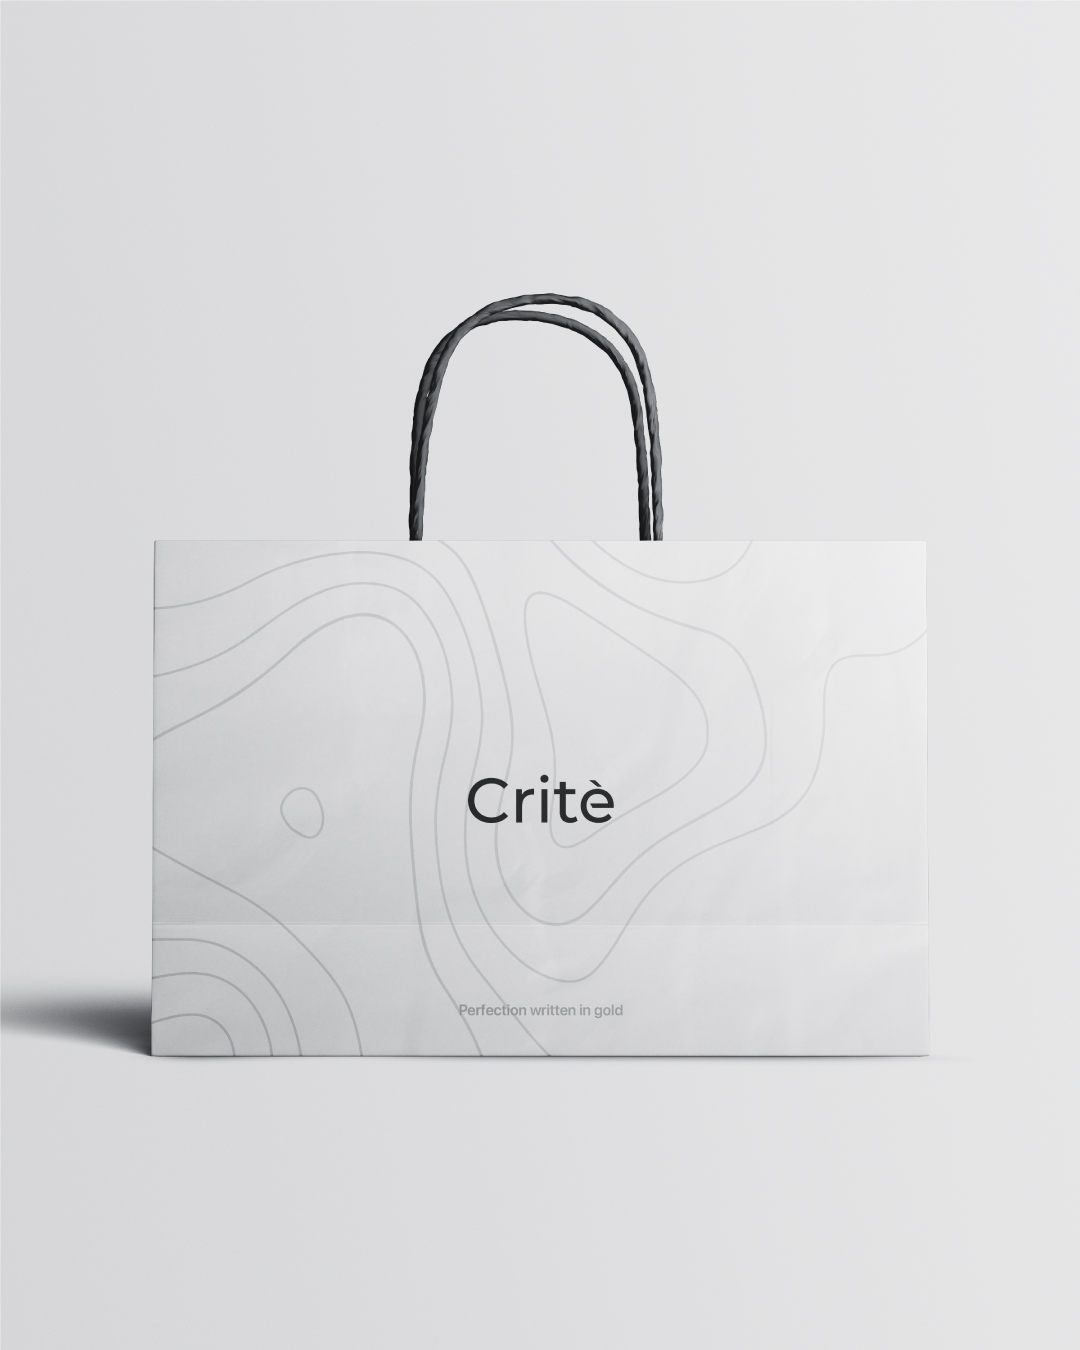 Branding Design for Crite Jewelry by TheProject.Design